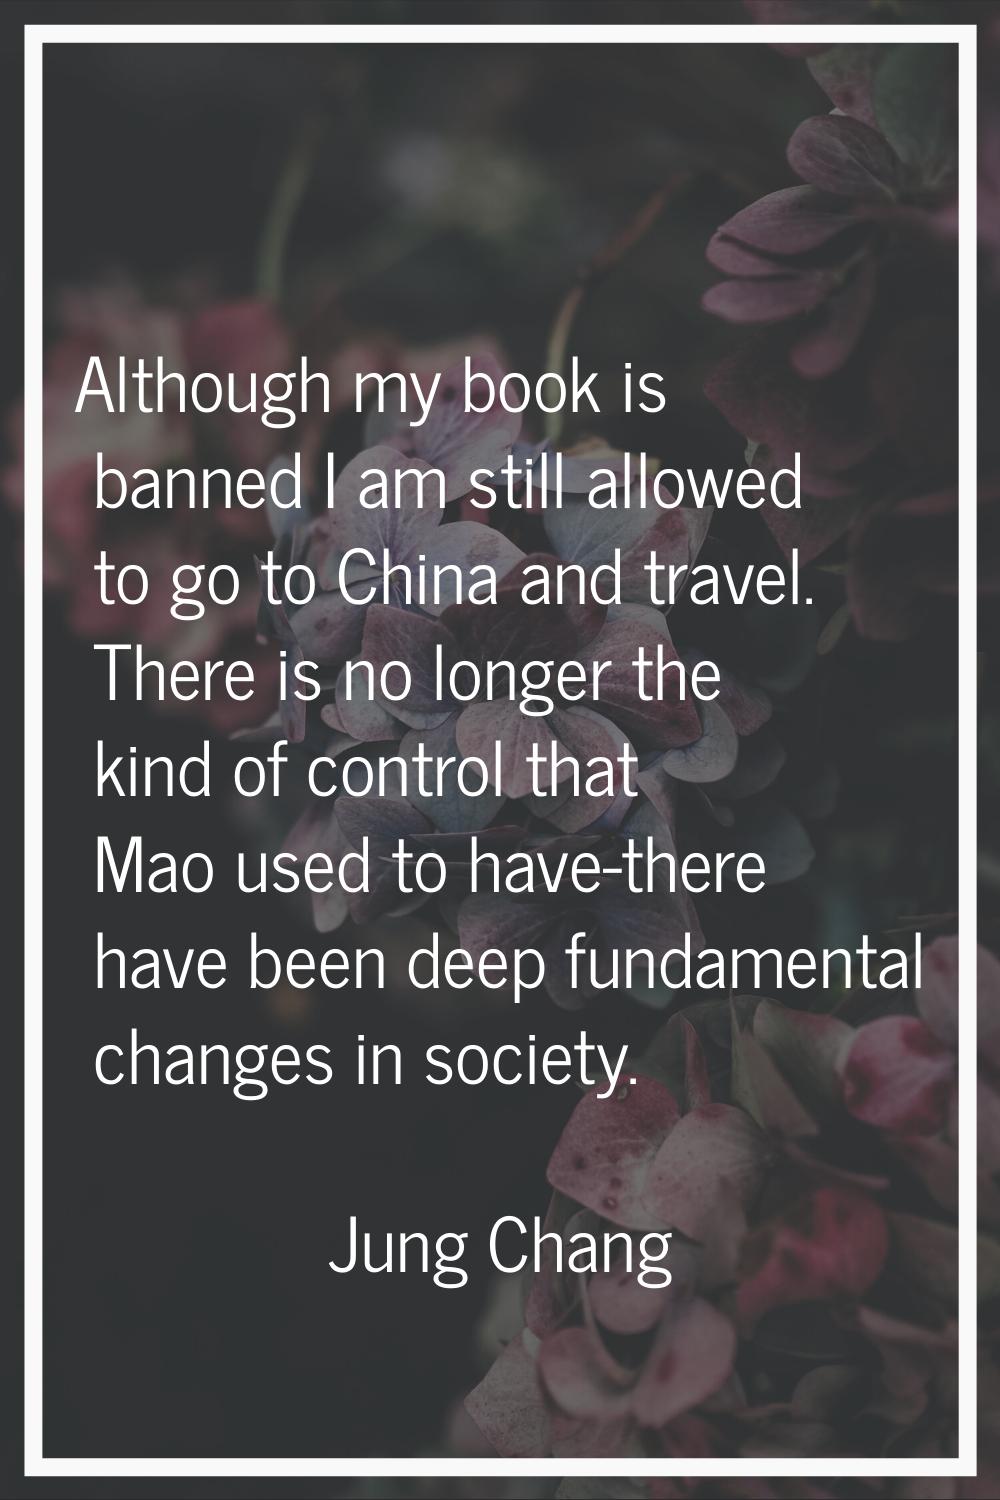 Although my book is banned I am still allowed to go to China and travel. There is no longer the kin